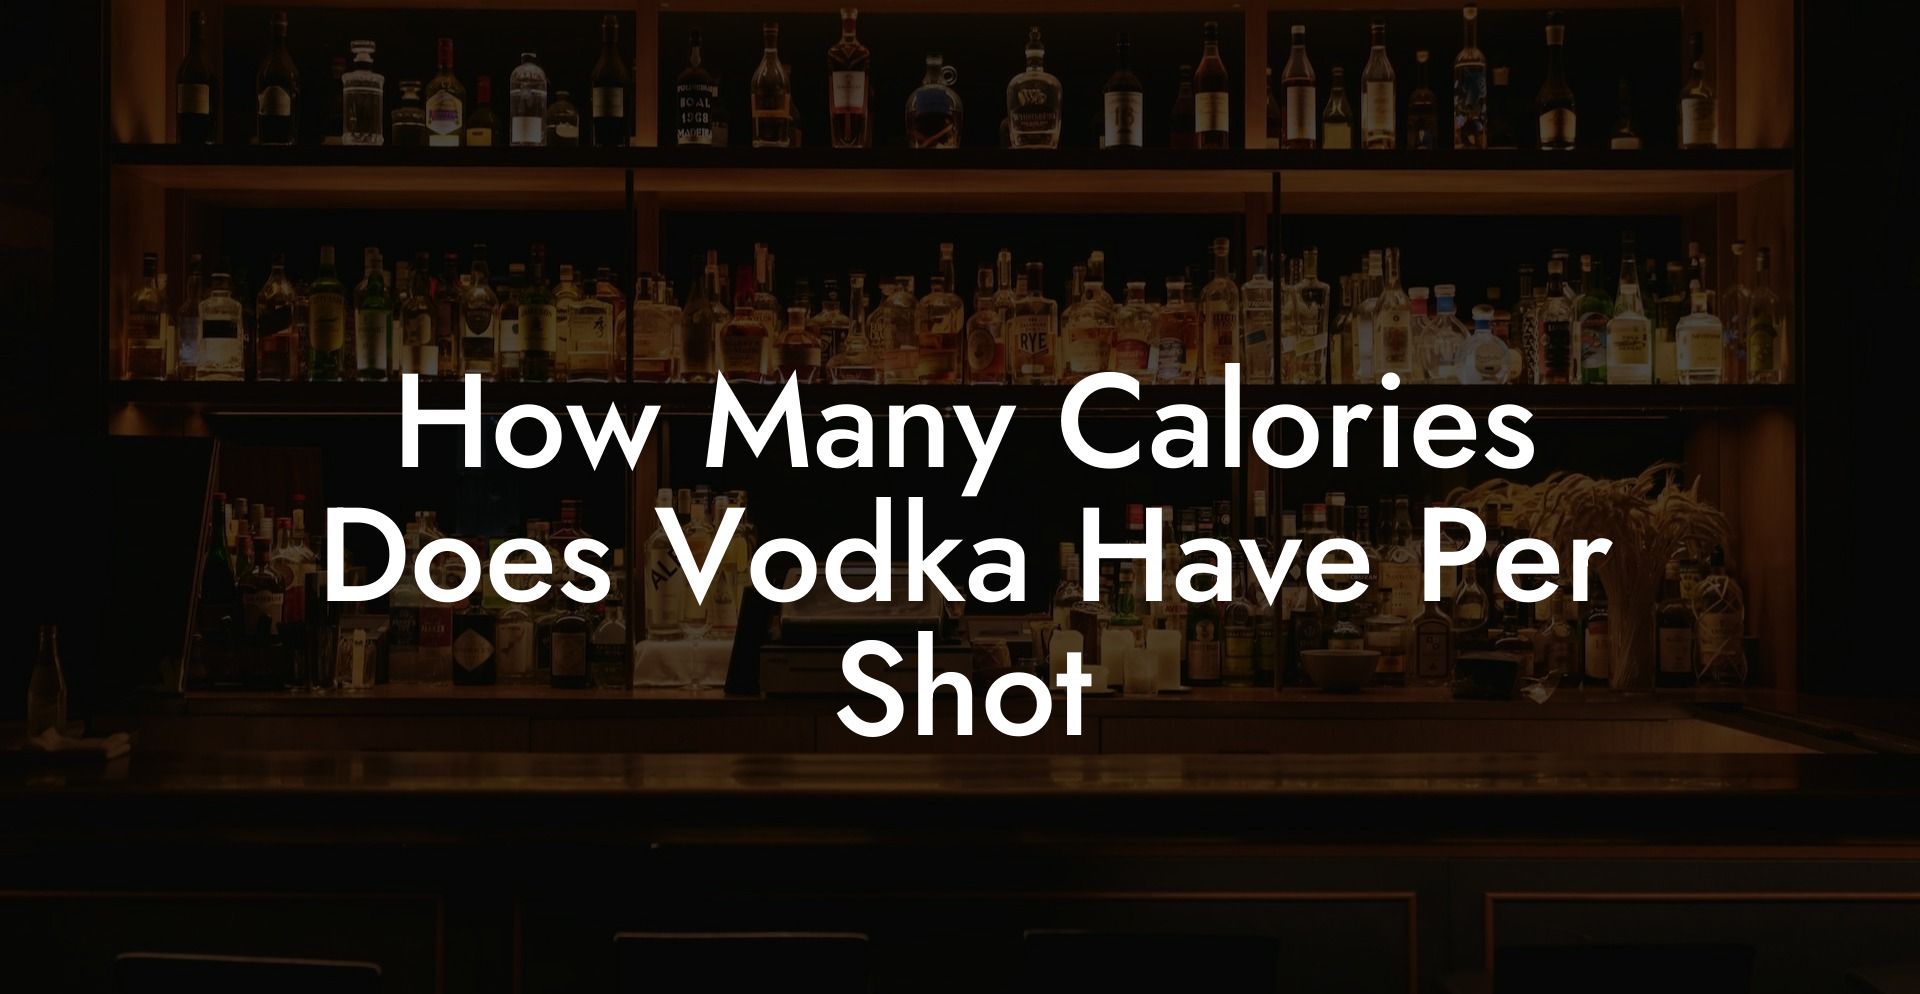 How Many Calories Does Vodka Have Per Shot